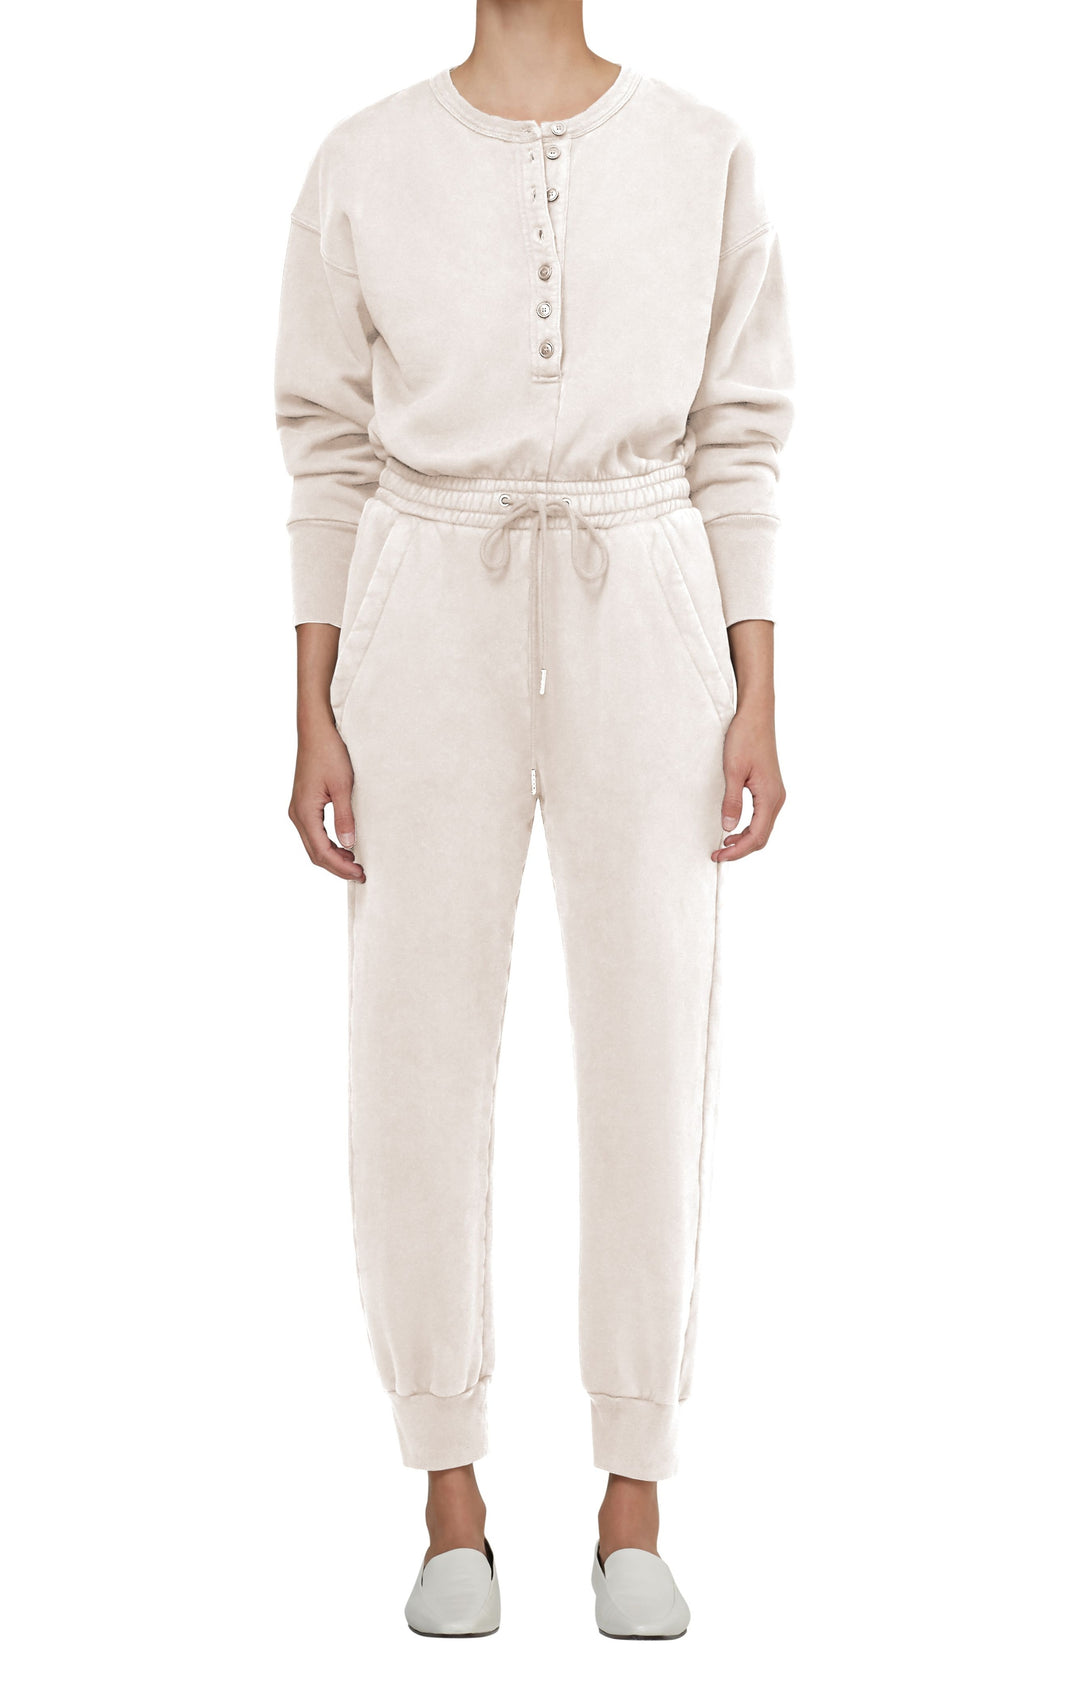 Citizens of Humanity - Loulou Fleece Jumpsuit in Travertine